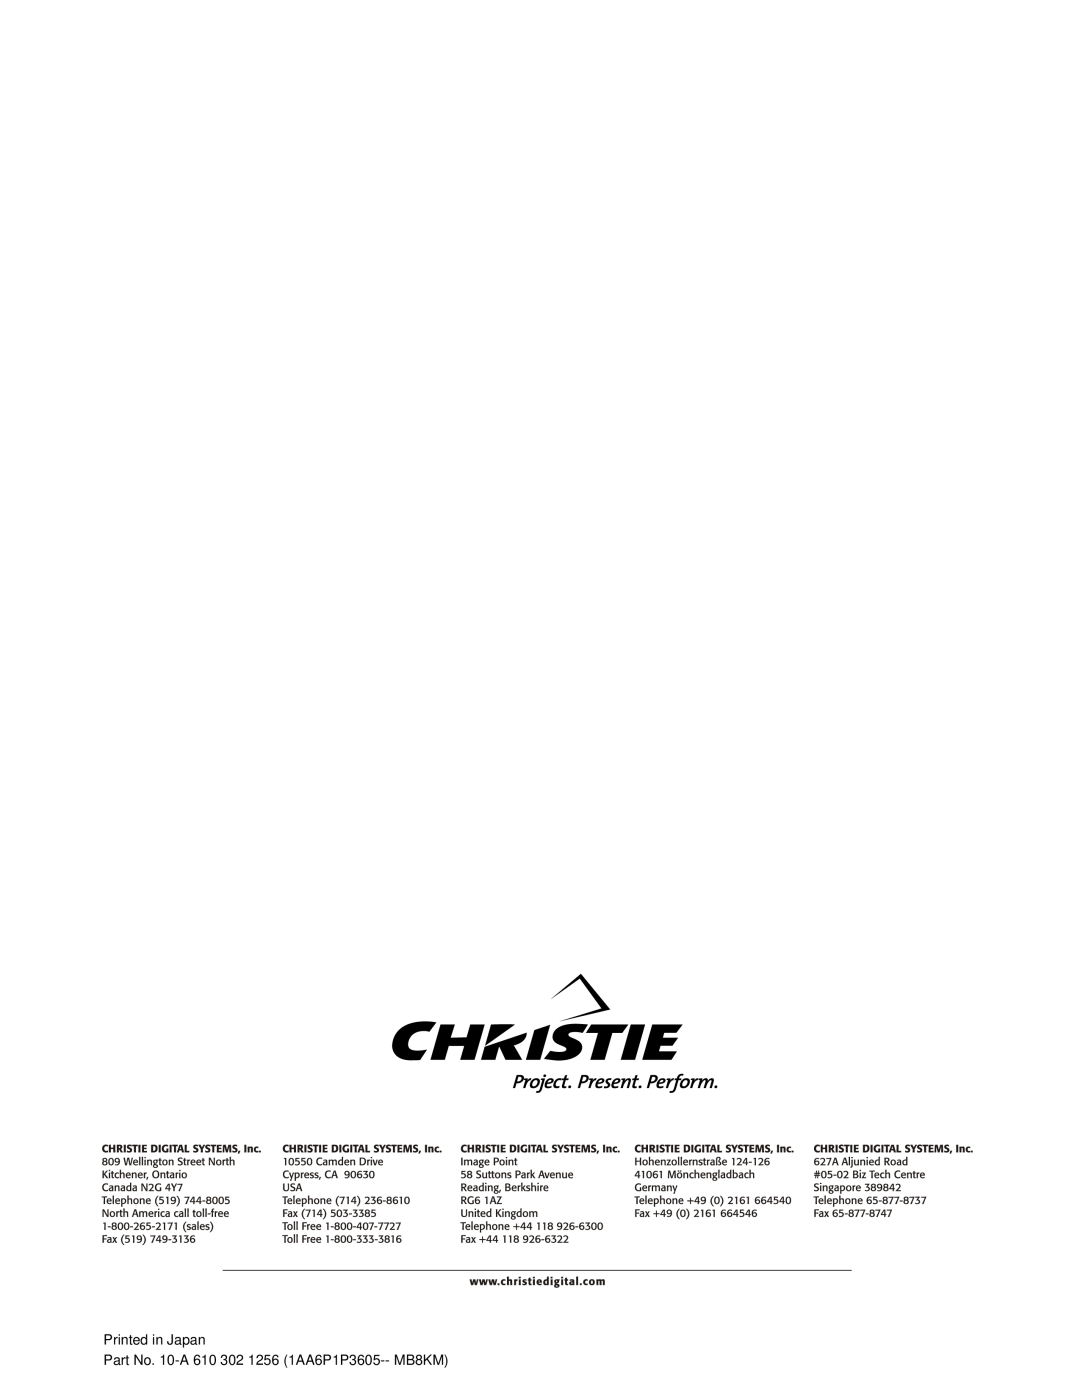 Christie Digital Systems 38-VIV205-01 user manual Printed in Japan Part No. 10-A 610 302 1256 1AA6P1P3605-- MB8KM 